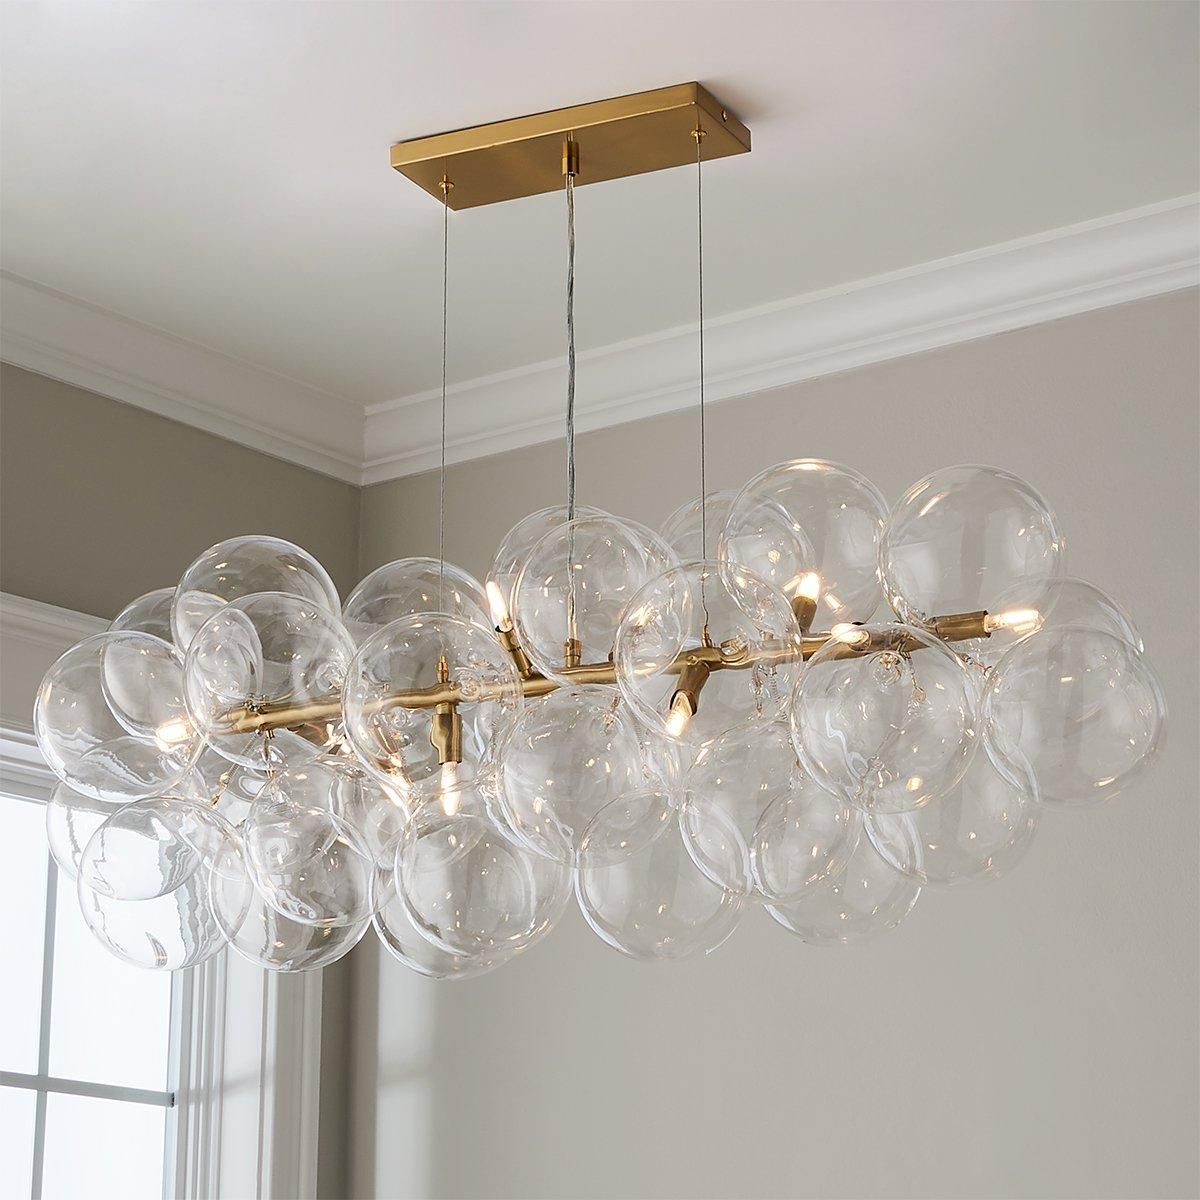 Bowlby Island Chandelier | Shades of Light